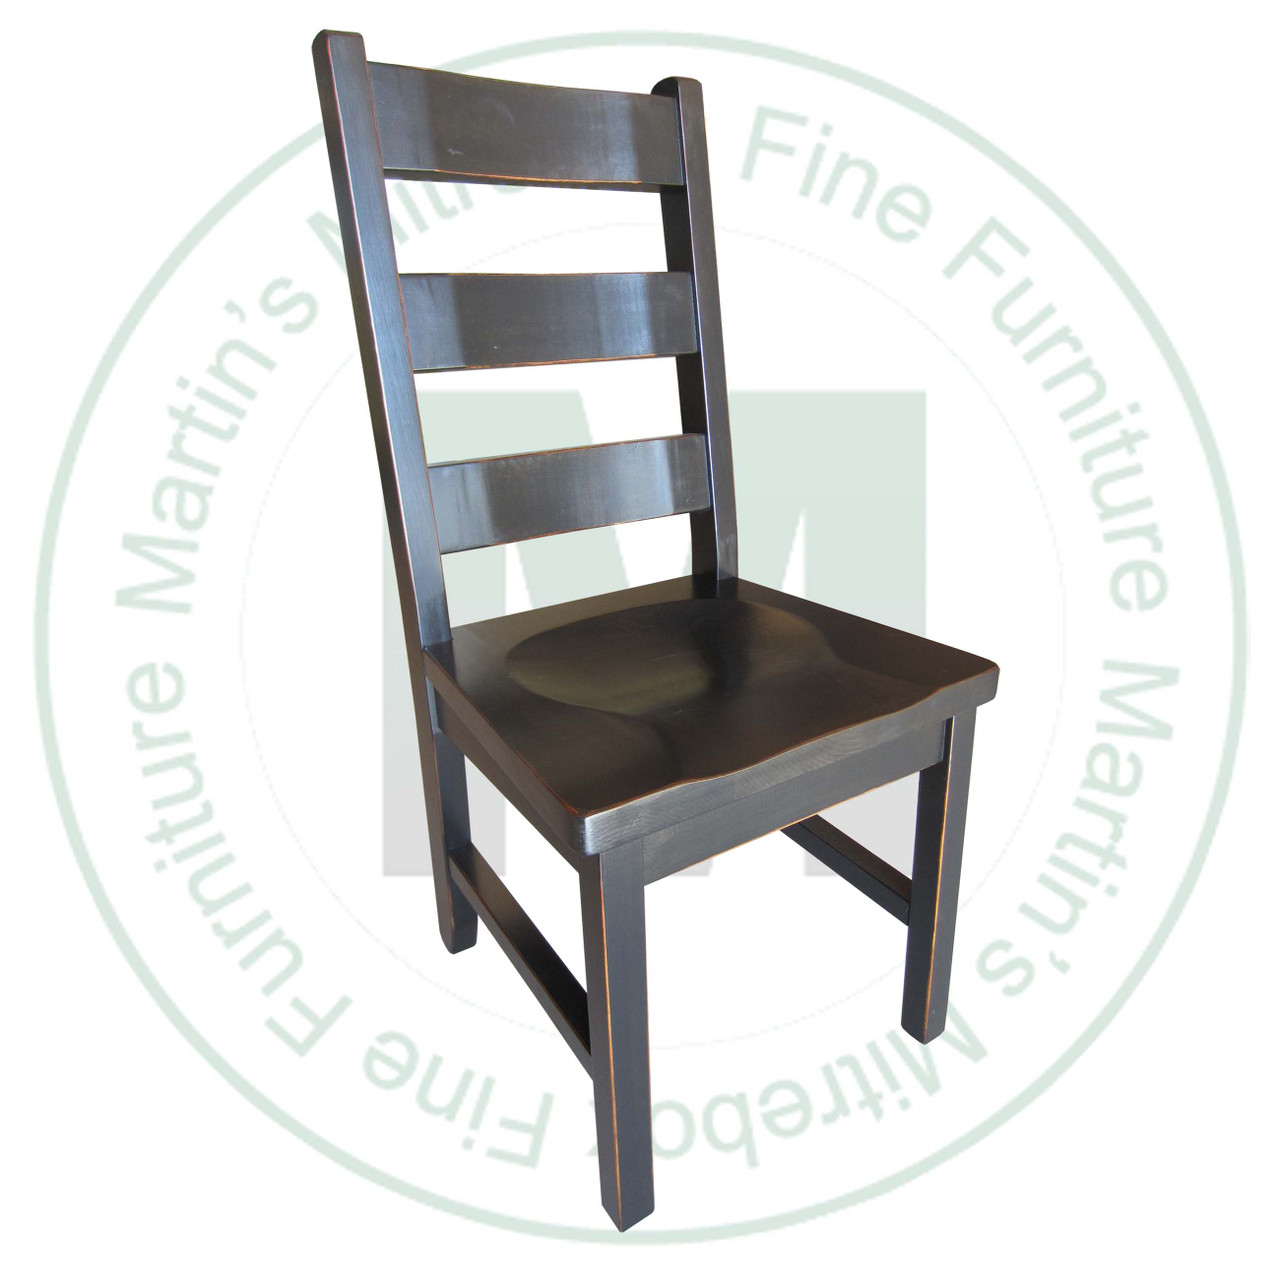 Pine Rustic Ladderback Side Chair With Wood Seat